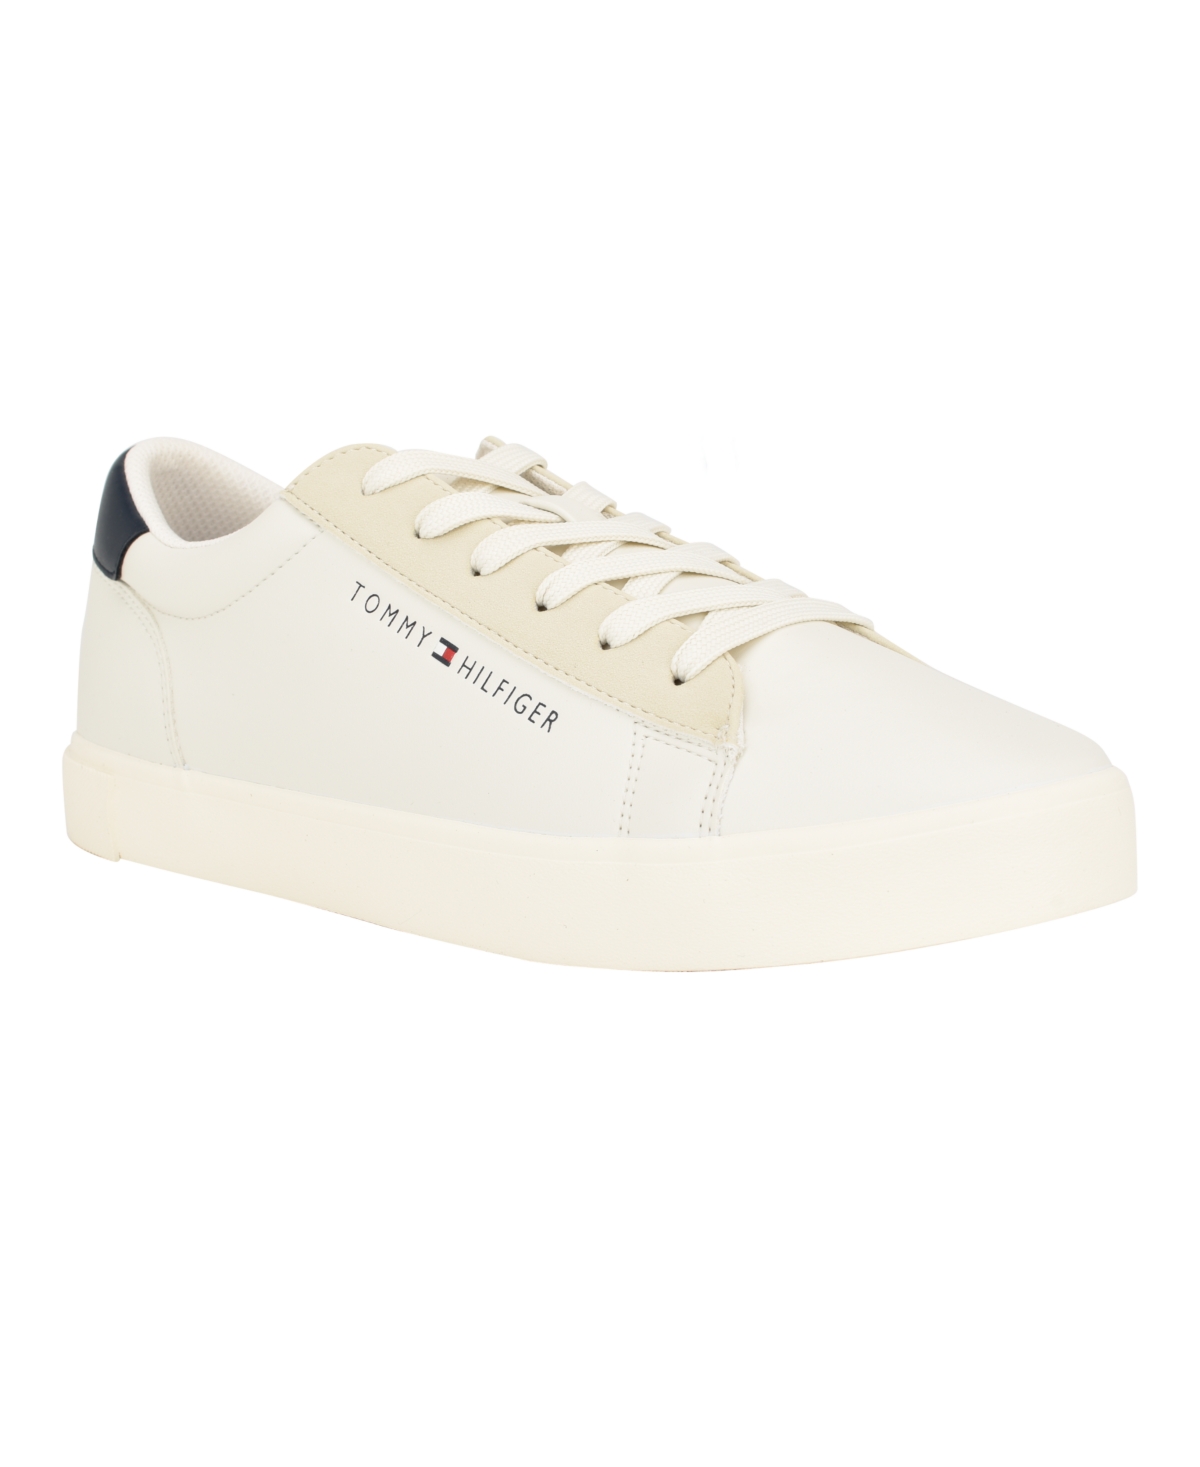 Tommy Hilfiger Men's Ribby Lace Up Fashion Sneakers In Cream,beige,navy